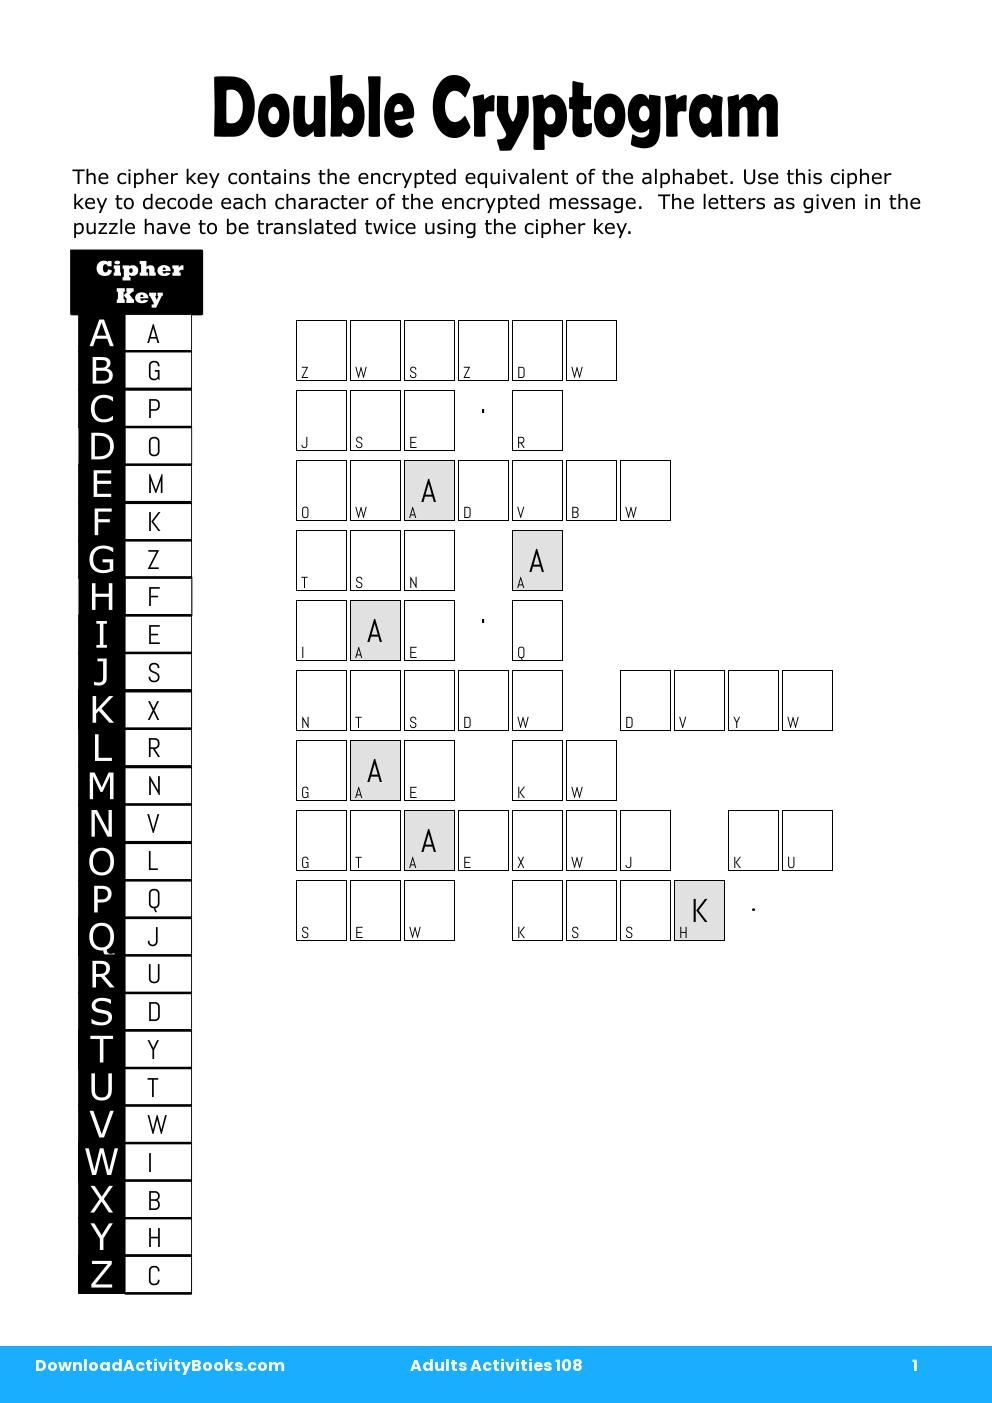 Double Cryptogram in Adults Activities 108